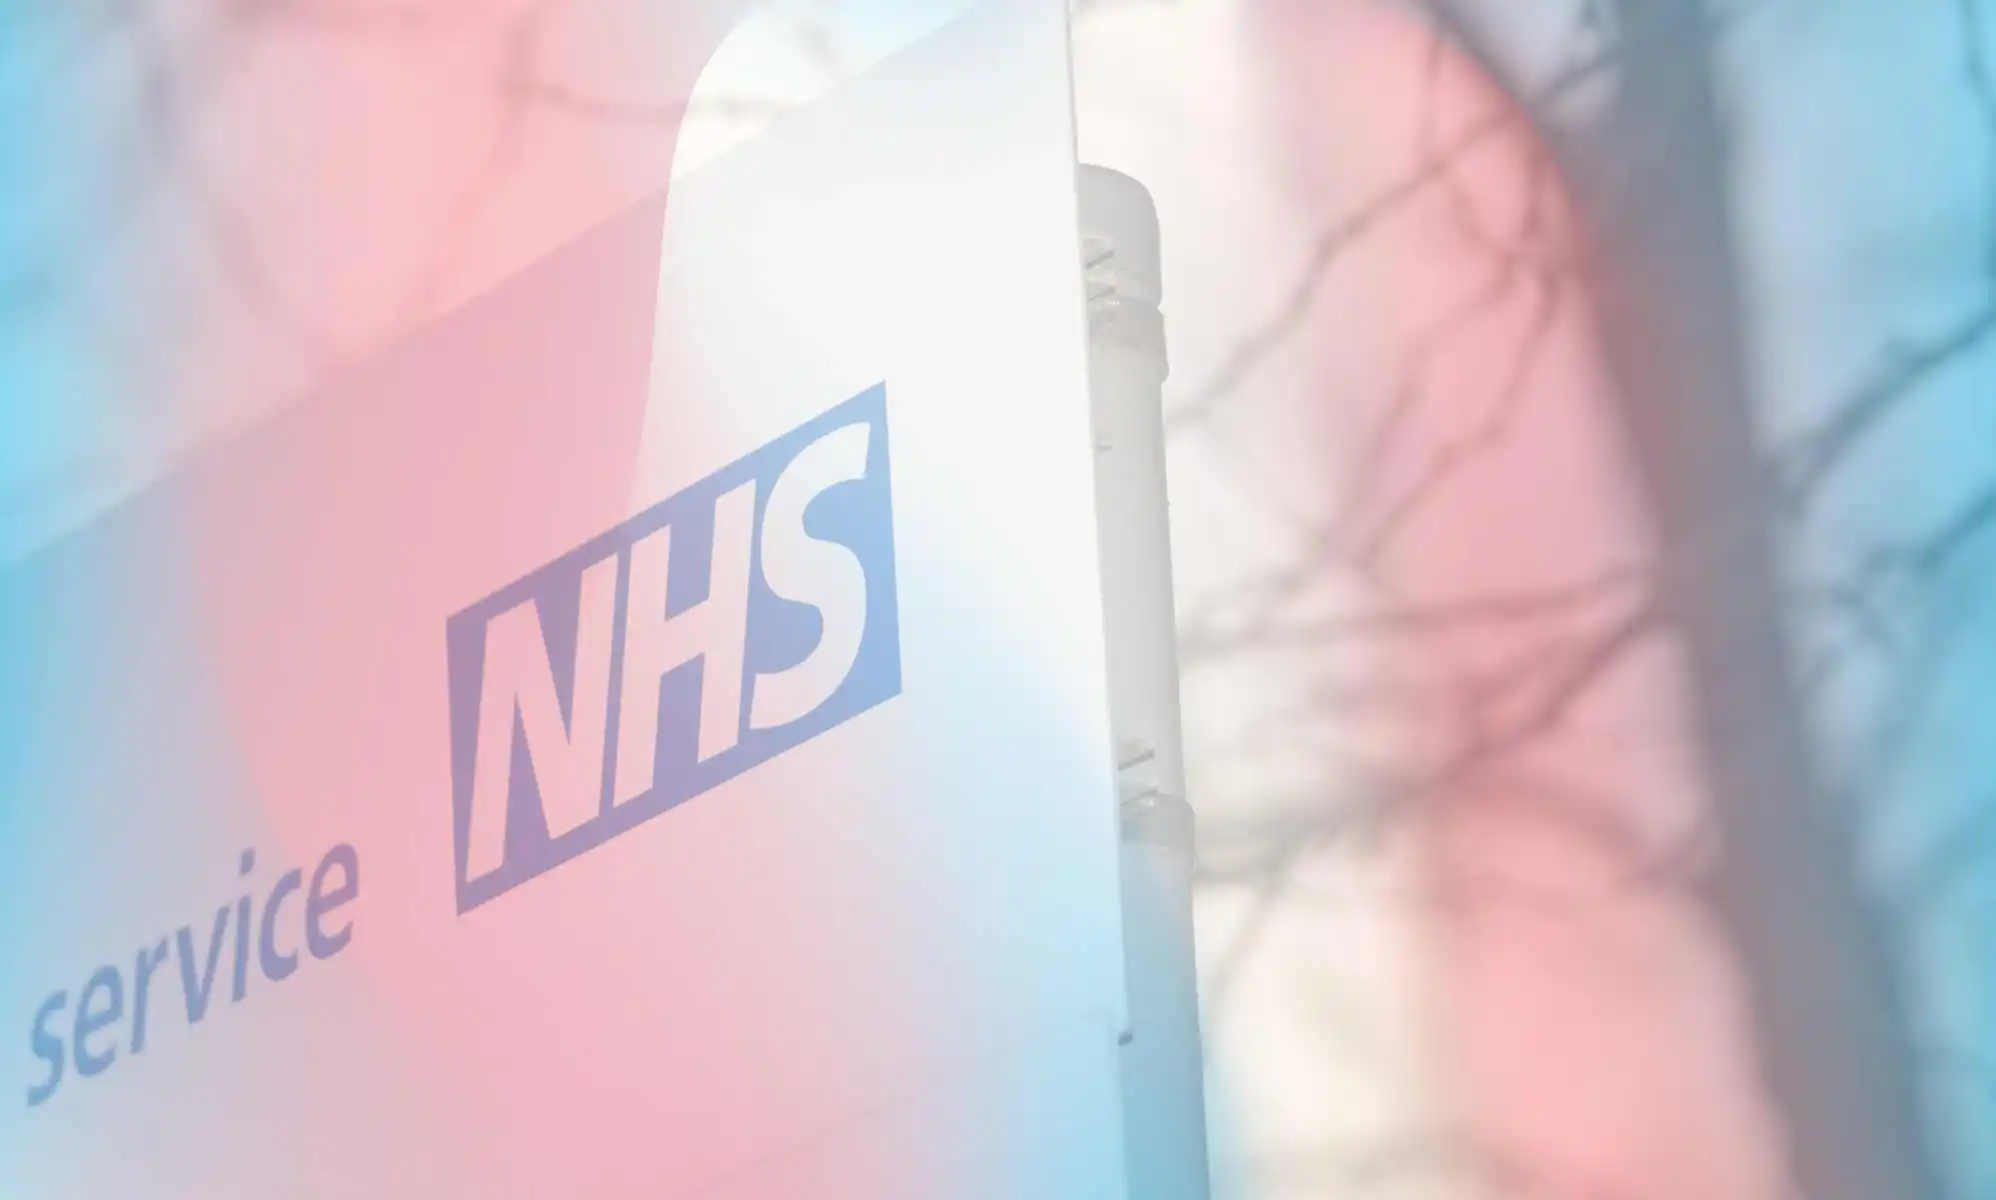 NHS satisfaction at all time low – but that’s the tip of the iceberg if you’re trans